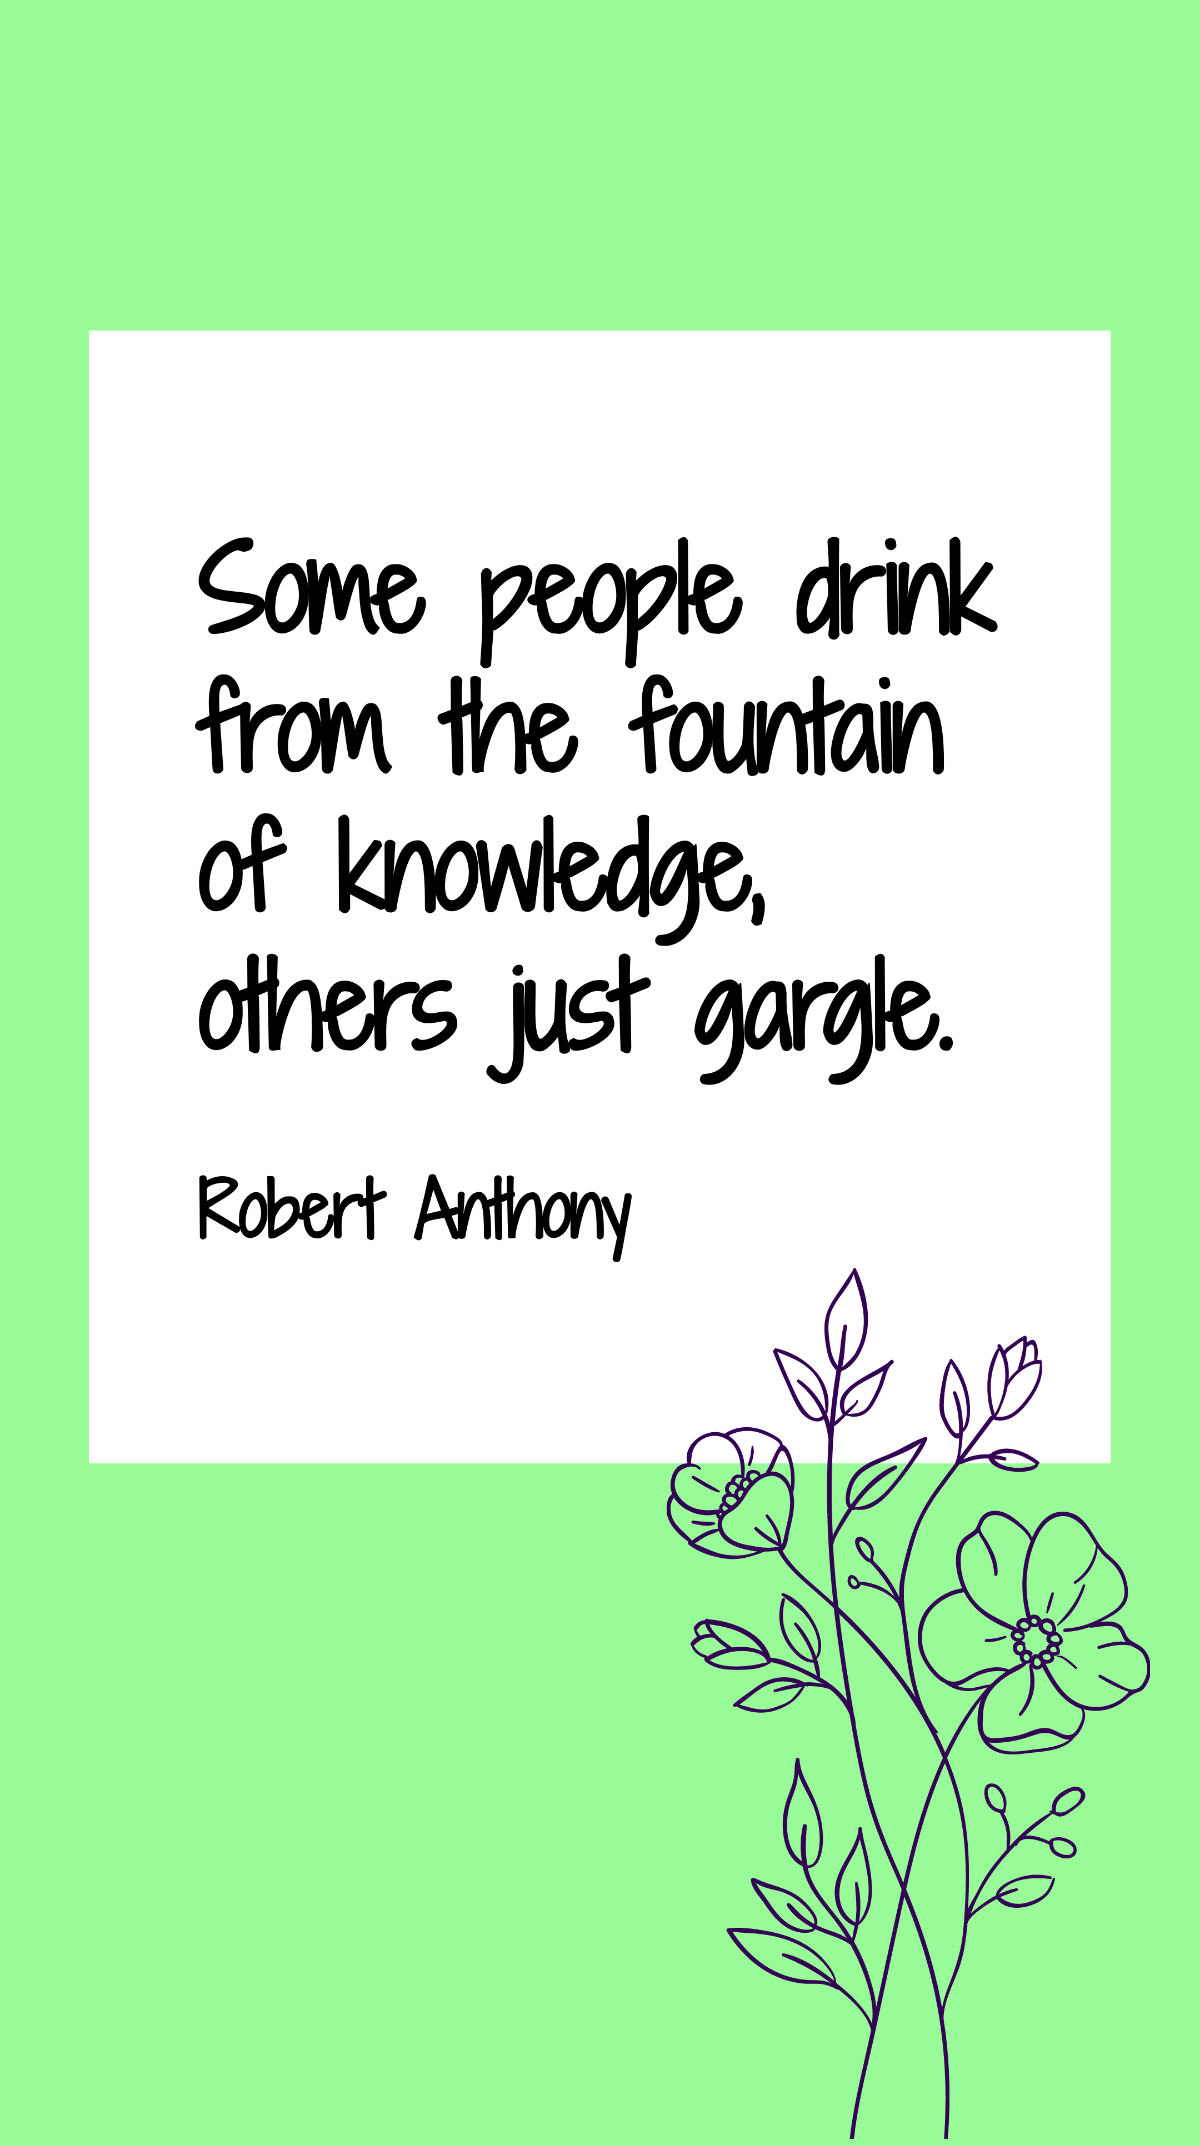 Robert Anthony - Some people drink from the fountain of knowledge, others just gargle. Template